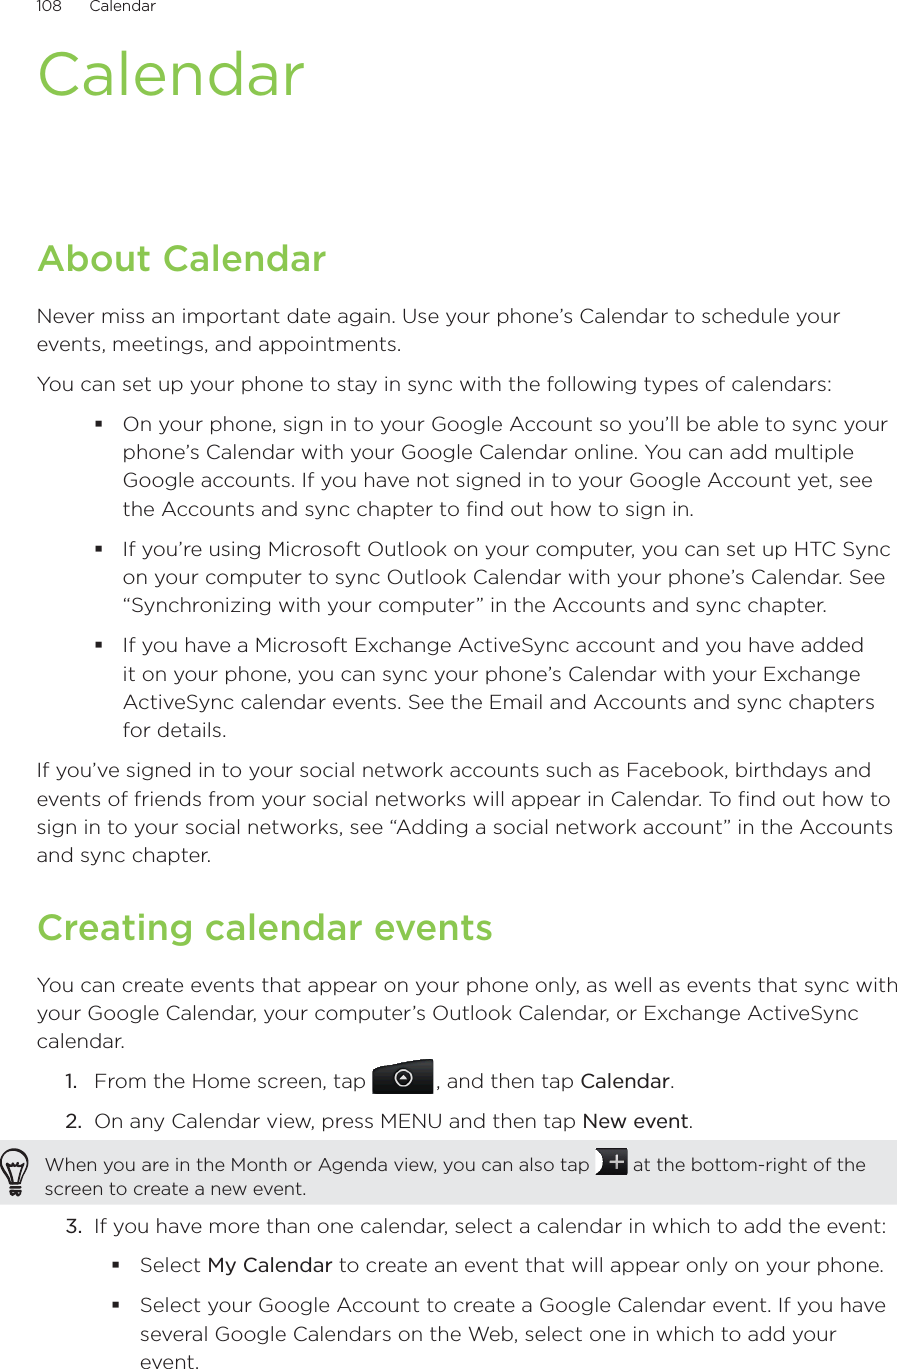 108      Calendar      CalendarAbout CalendarNever miss an important date again. Use your phone’s Calendar to schedule your events, meetings, and appointments.You can set up your phone to stay in sync with the following types of calendars:On your phone, sign in to your Google Account so you’ll be able to sync your phone’s Calendar with your Google Calendar online. You can add multiple Google accounts. If you have not signed in to your Google Account yet, see the Accounts and sync chapter to find out how to sign in.If you’re using Microsoft Outlook on your computer, you can set up HTC Sync on your computer to sync Outlook Calendar with your phone’s Calendar. See “Synchronizing with your computer” in the Accounts and sync chapter.If you have a Microsoft Exchange ActiveSync account and you have added it on your phone, you can sync your phone’s Calendar with your Exchange ActiveSync calendar events. See the Email and Accounts and sync chapters for details.If you’ve signed in to your social network accounts such as Facebook, birthdays and events of friends from your social networks will appear in Calendar. To find out how to sign in to your social networks, see “Adding a social network account” in the Accounts and sync chapter.Creating calendar eventsYou can create events that appear on your phone only, as well as events that sync with your Google Calendar, your computer’s Outlook Calendar, or Exchange ActiveSync calendar.1.  From the Home screen, tap  , and then tap Calendar.2.  On any Calendar view, press MENU and then tap New event.When you are in the Month or Agenda view, you can also tap   at the bottom-right of the screen to create a new event.3.  If you have more than one calendar, select a calendar in which to add the event:Select My Calendar to create an event that will appear only on your phone.Select your Google Account to create a Google Calendar event. If you have several Google Calendars on the Web, select one in which to add your event.